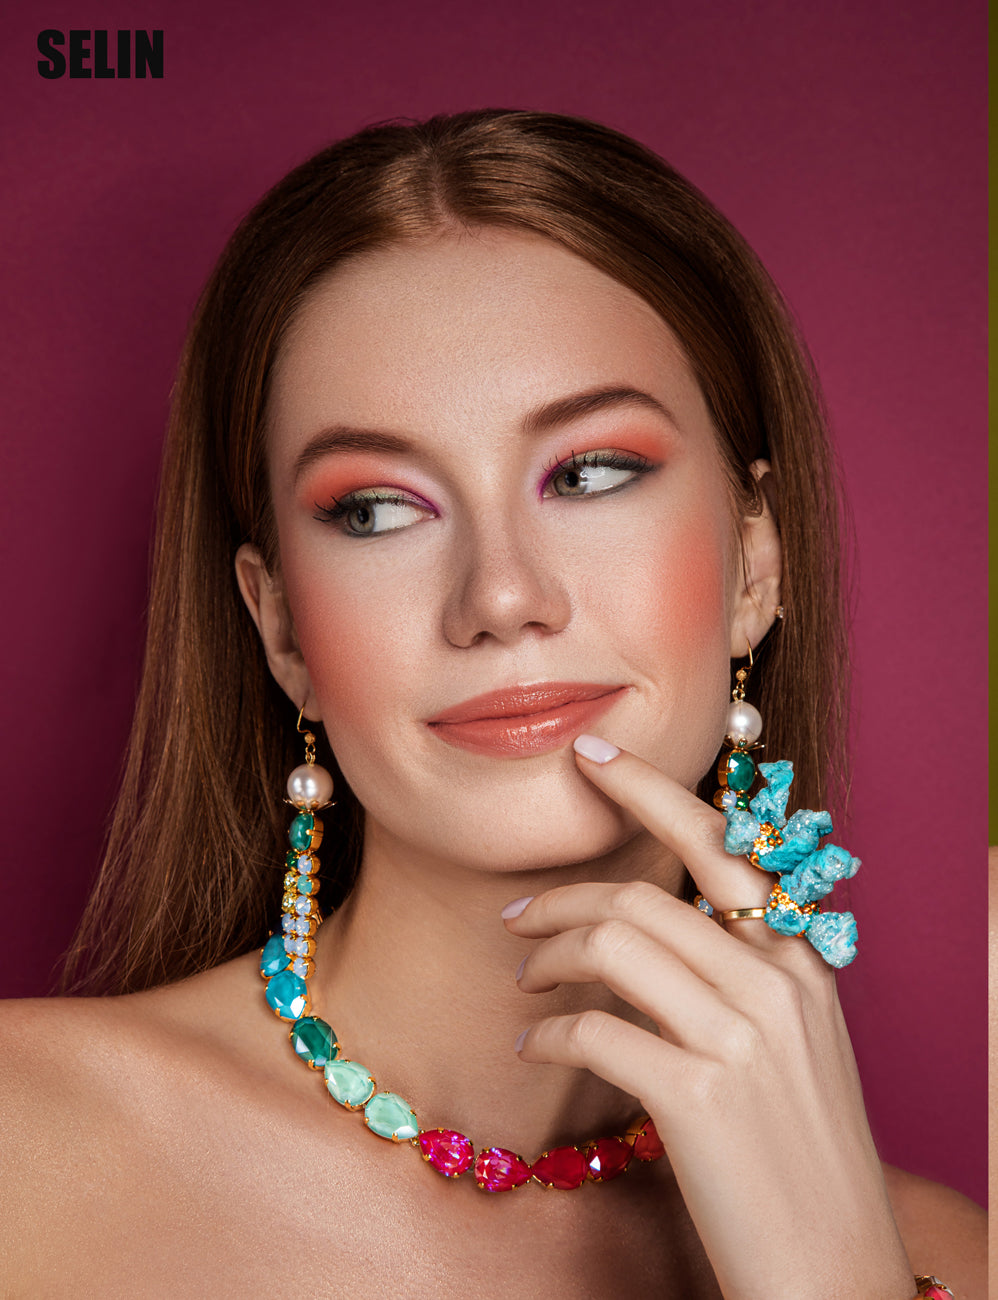 SILDARE_jewelry_Crystal-statement-colored-luxury-handmade-unique-ootd-gold-plated-rock-crystal-ring-earrings-necklace-newyork-france-paris-selinmagazine